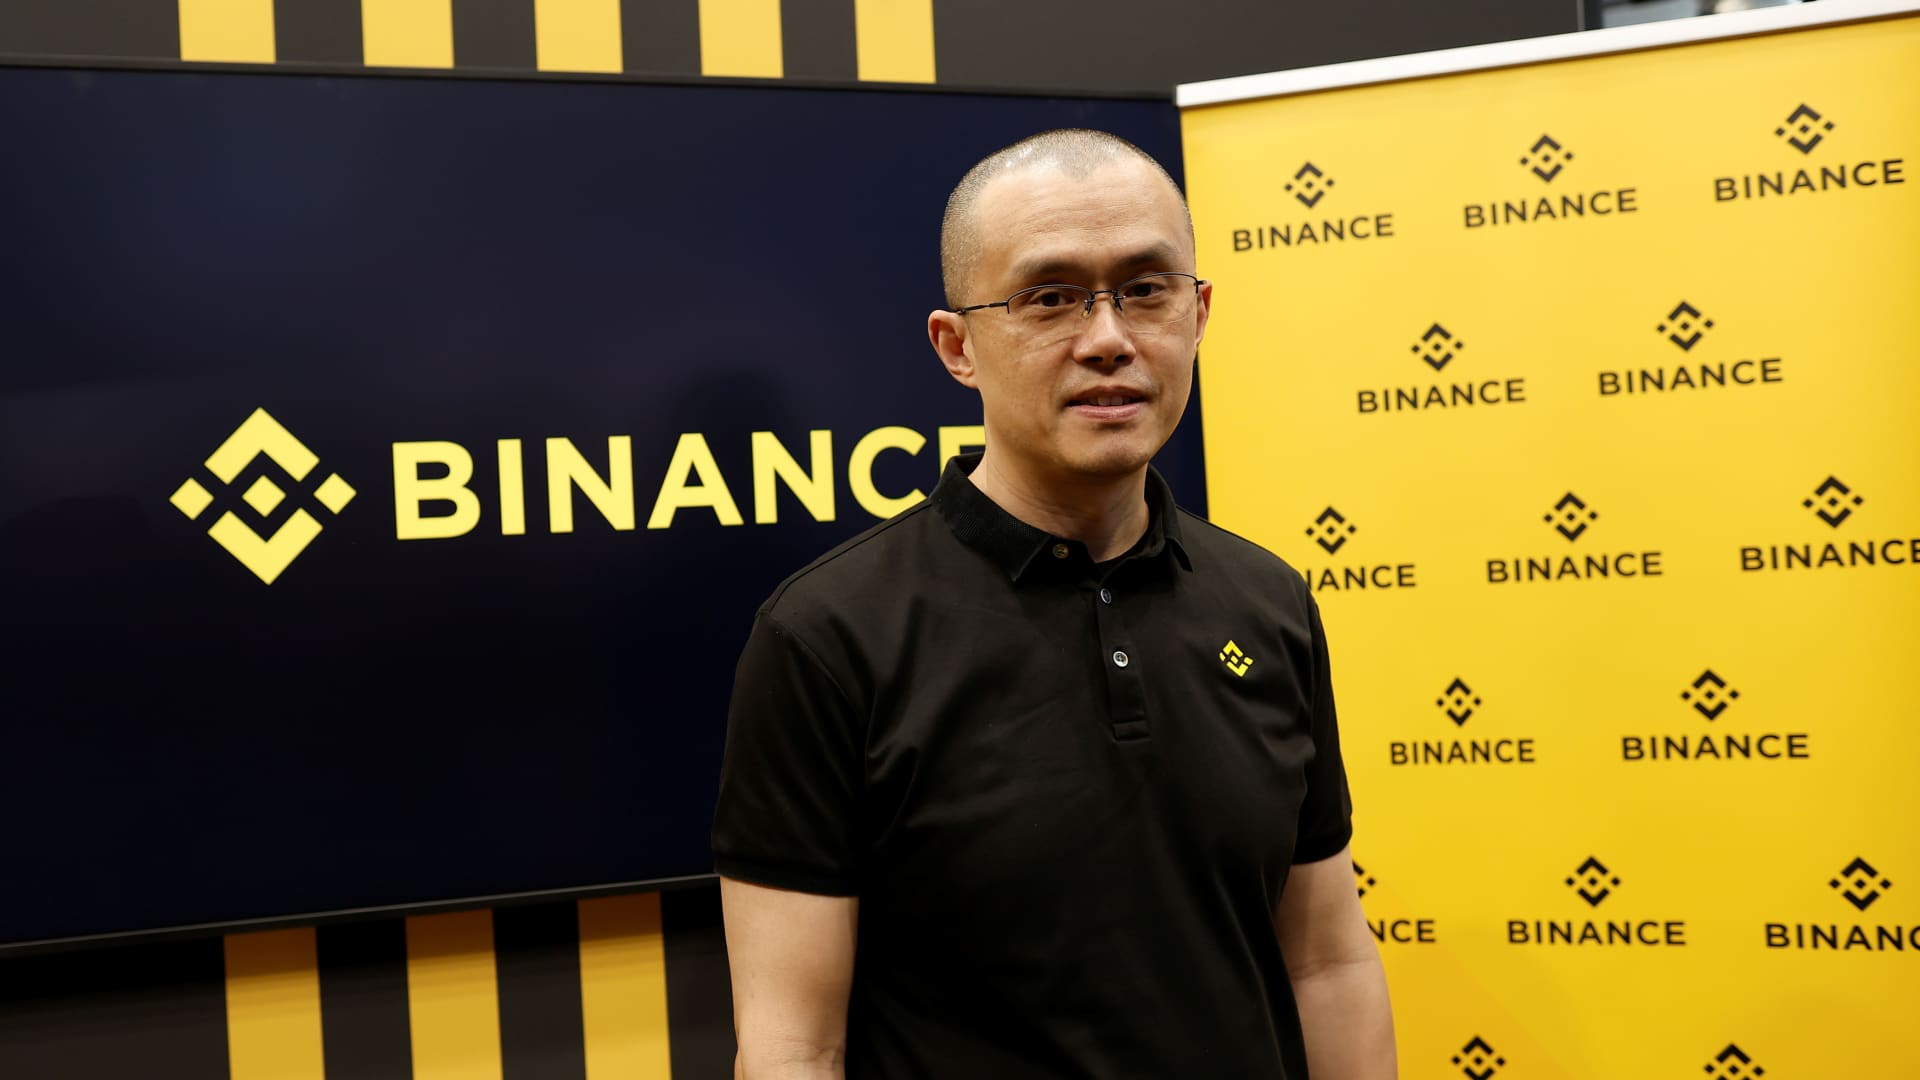 Binance founder Changpeng Zhao travel blocked by federal judge